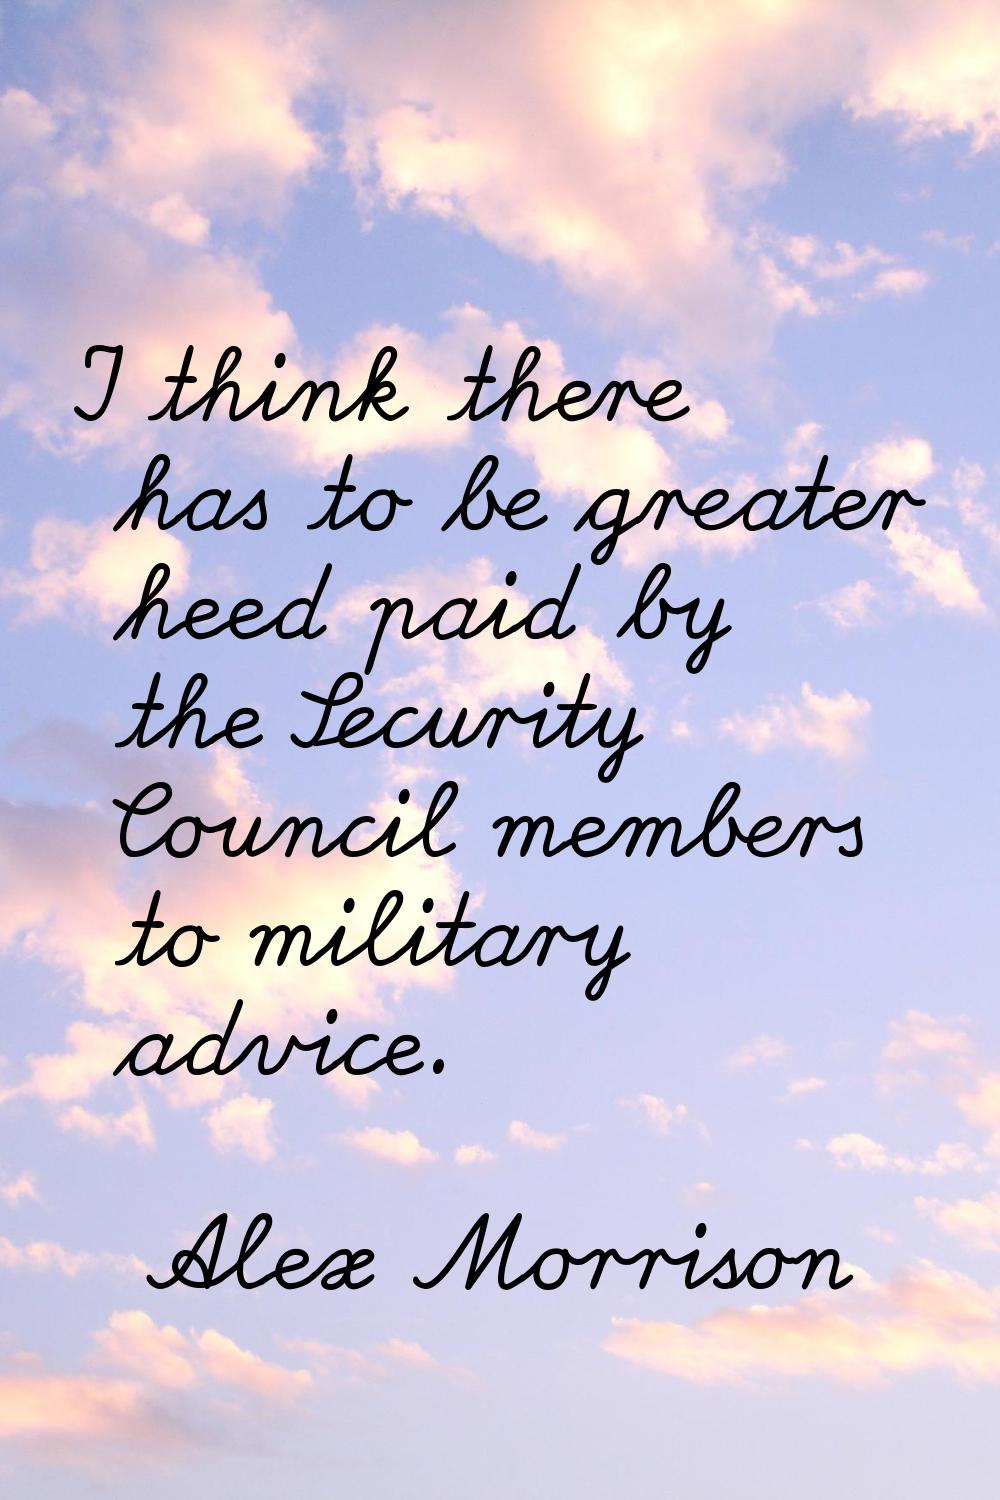 I think there has to be greater heed paid by the Security Council members to military advice.